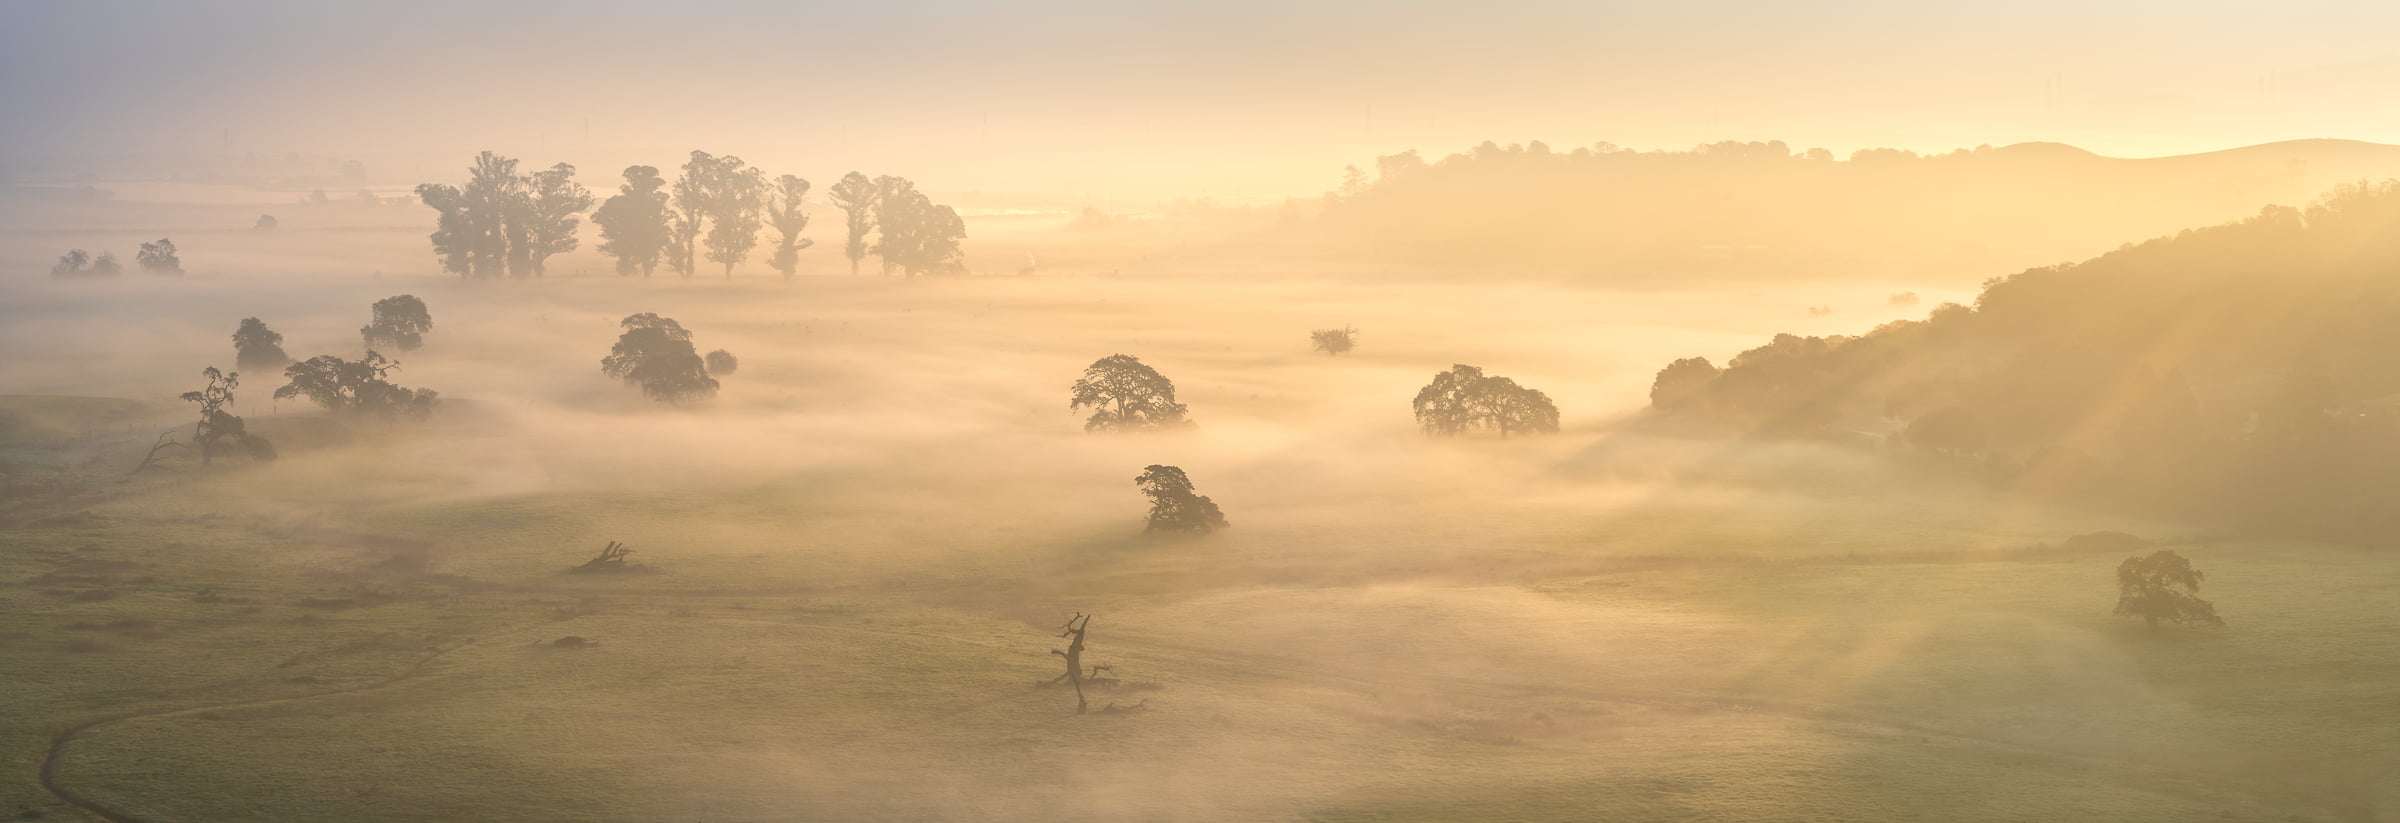 263 megapixels! A very high resolution, large-format VAST photo print of a peaceful morning landscape with a grass field, trees, light fog, and sun rays; landscape photograph created by Jeff Lewis in Northern California